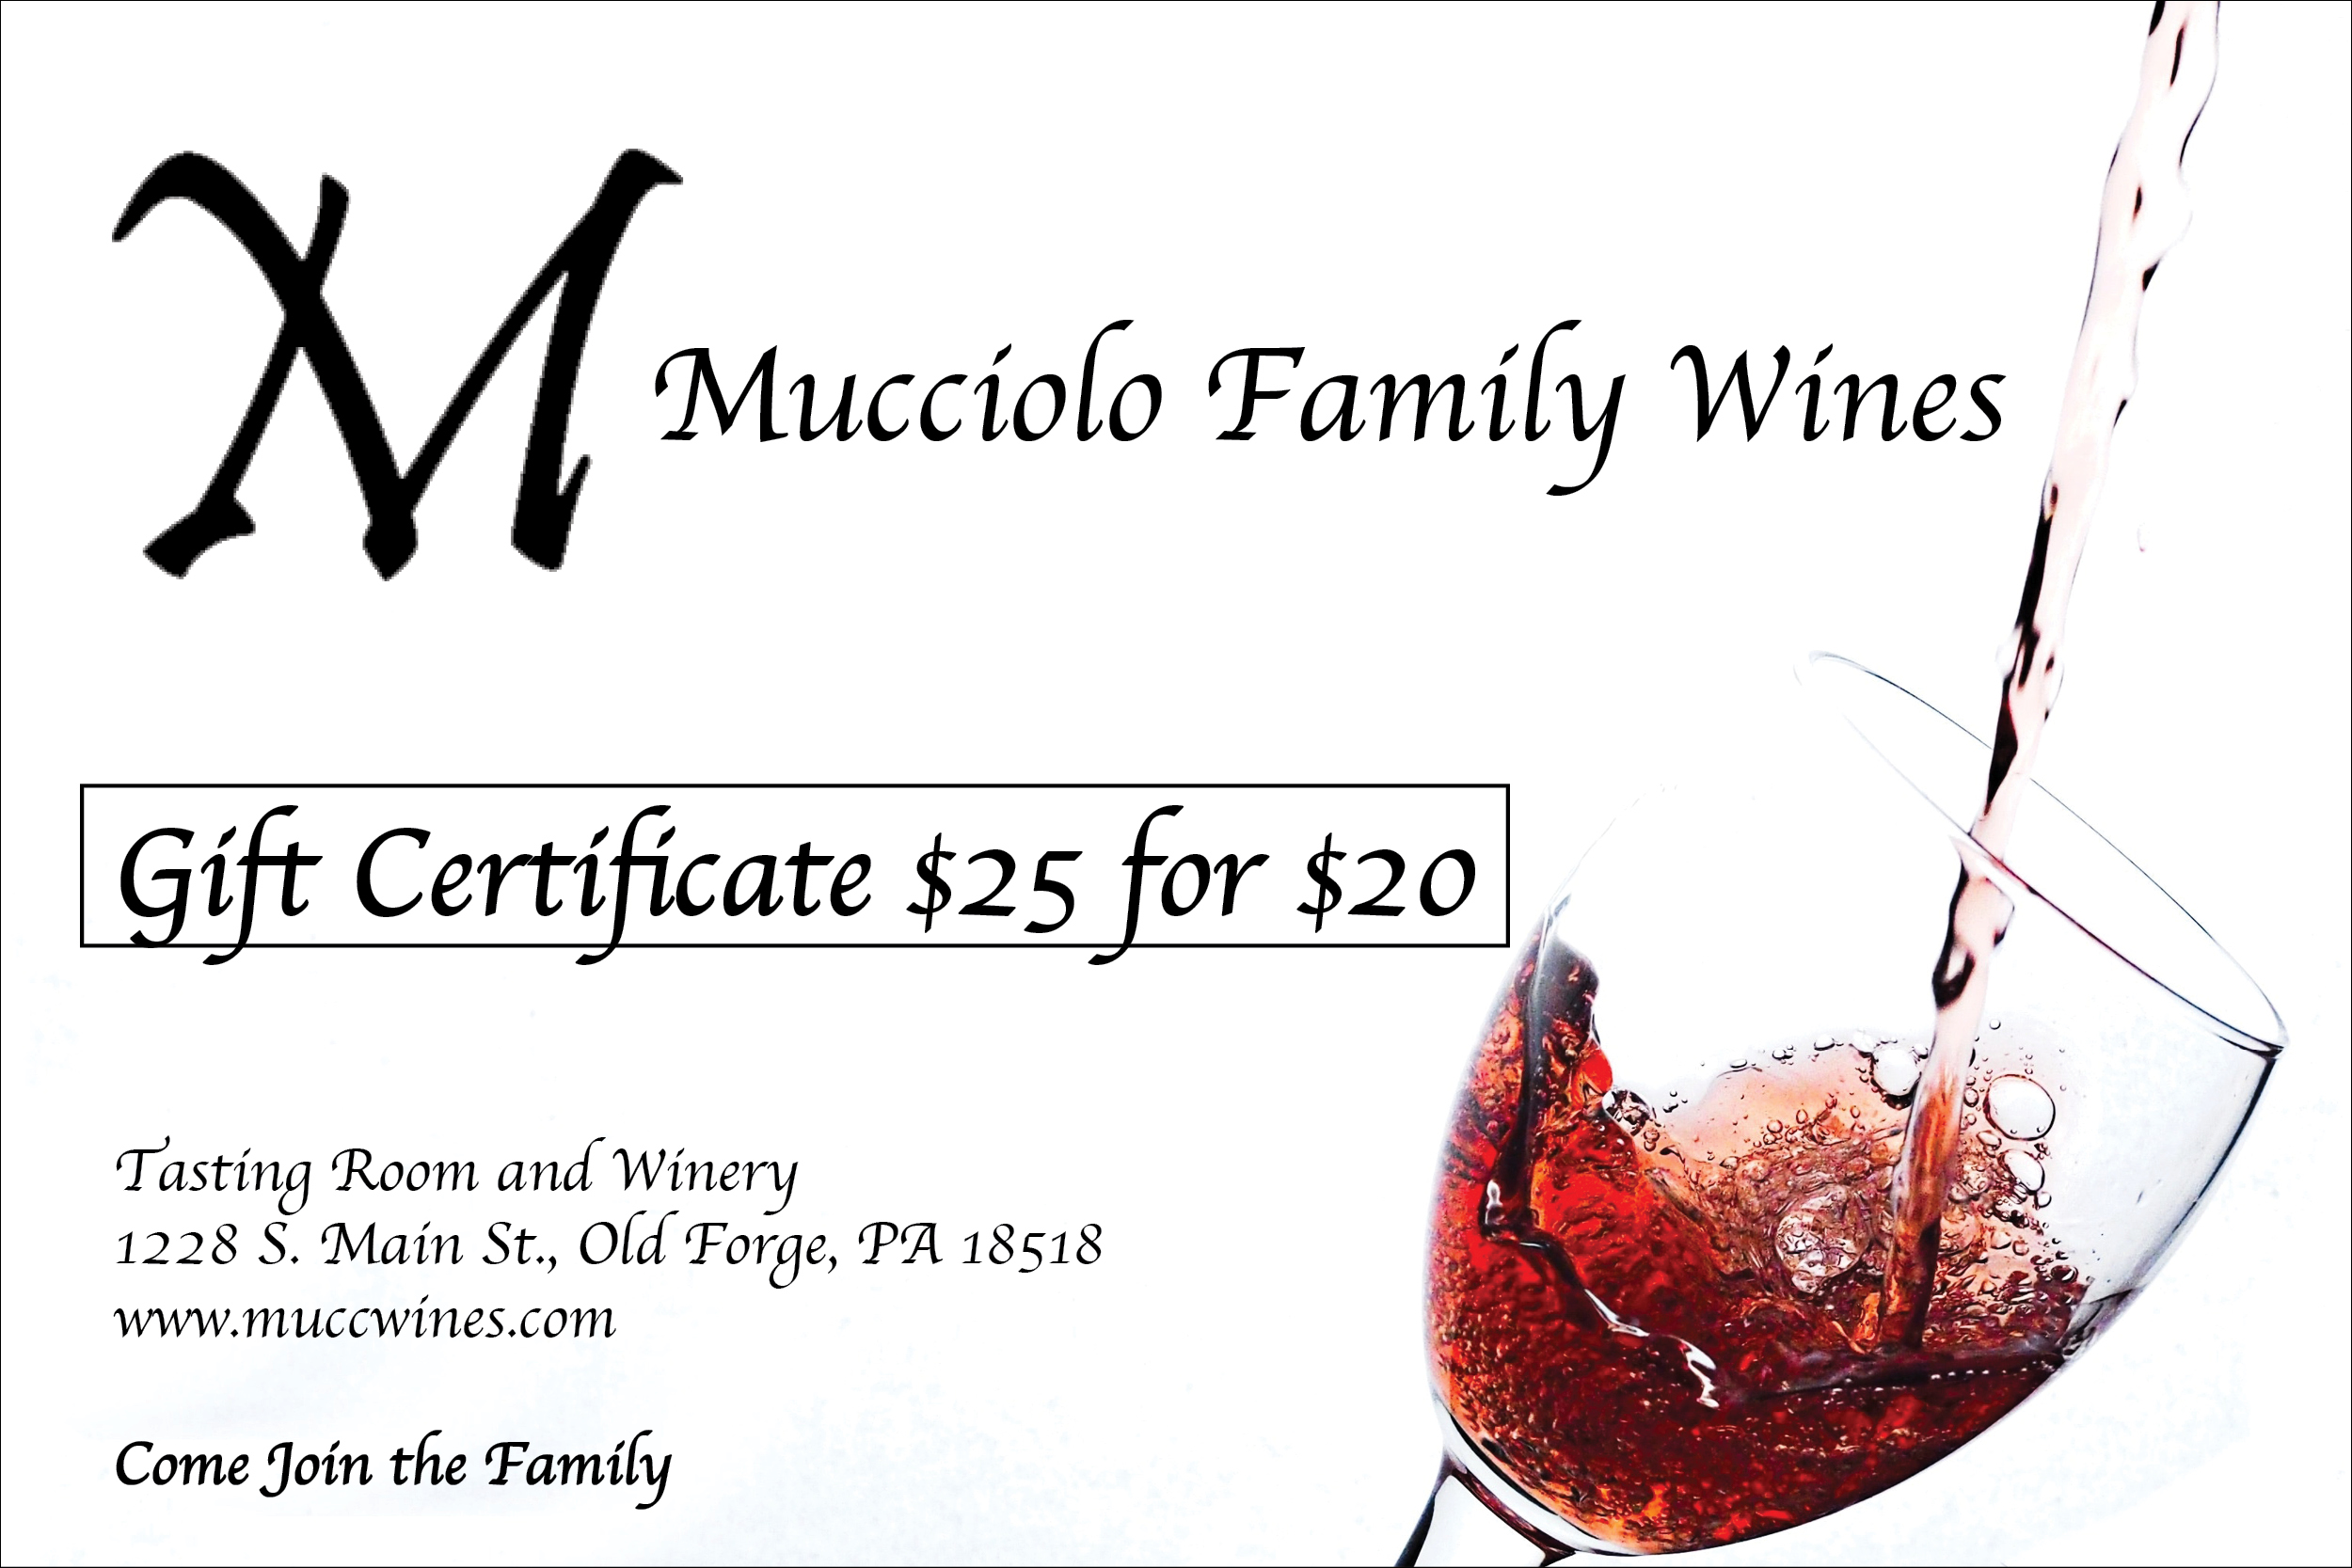 mucciolo-winery-gift-certificate-25-for-20-times-leader